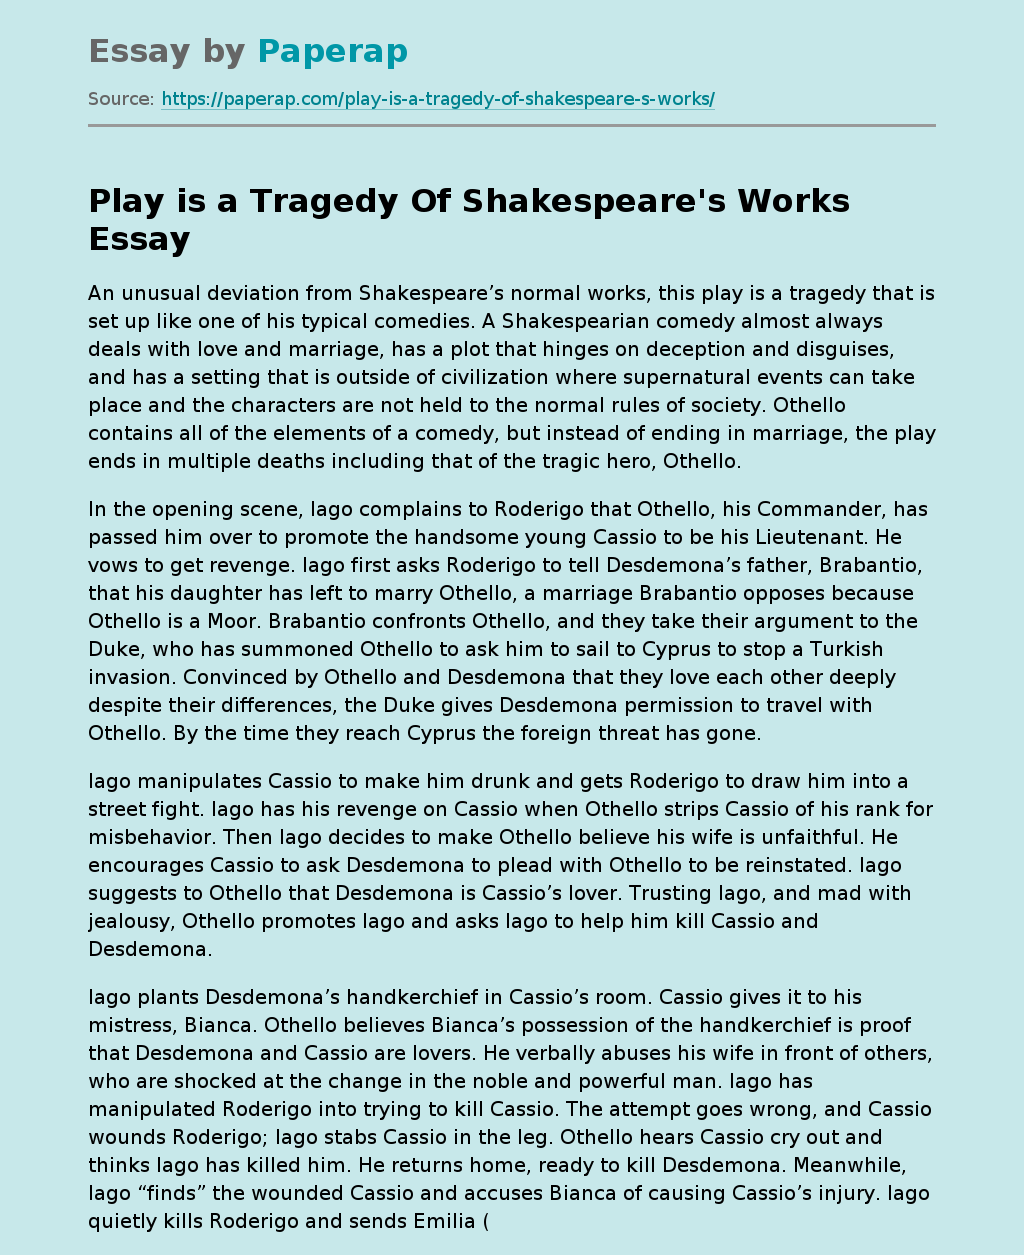 Play is a Tragedy Of Shakespeare's Works